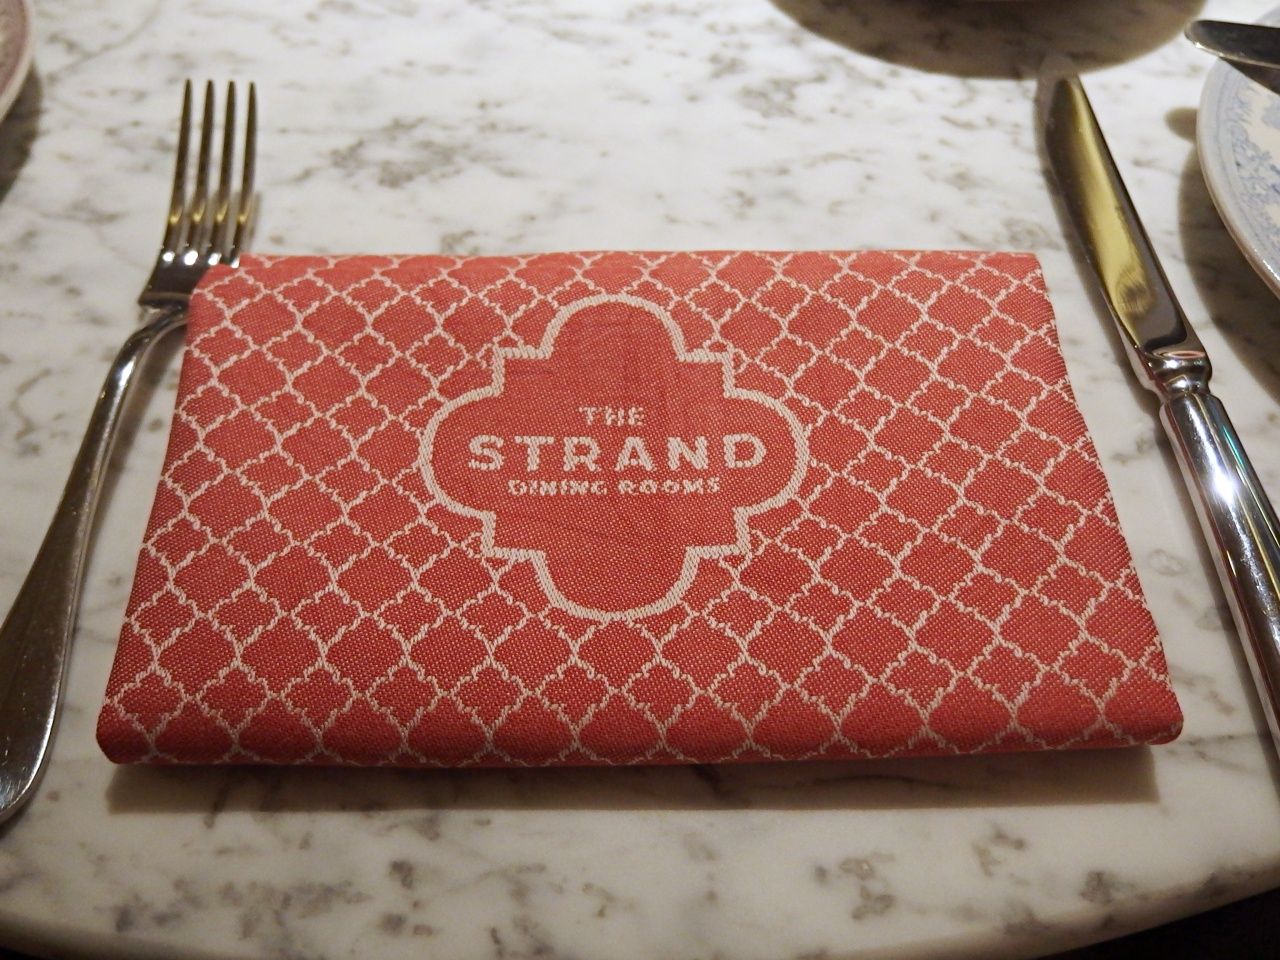 The Strand Dining Rooms